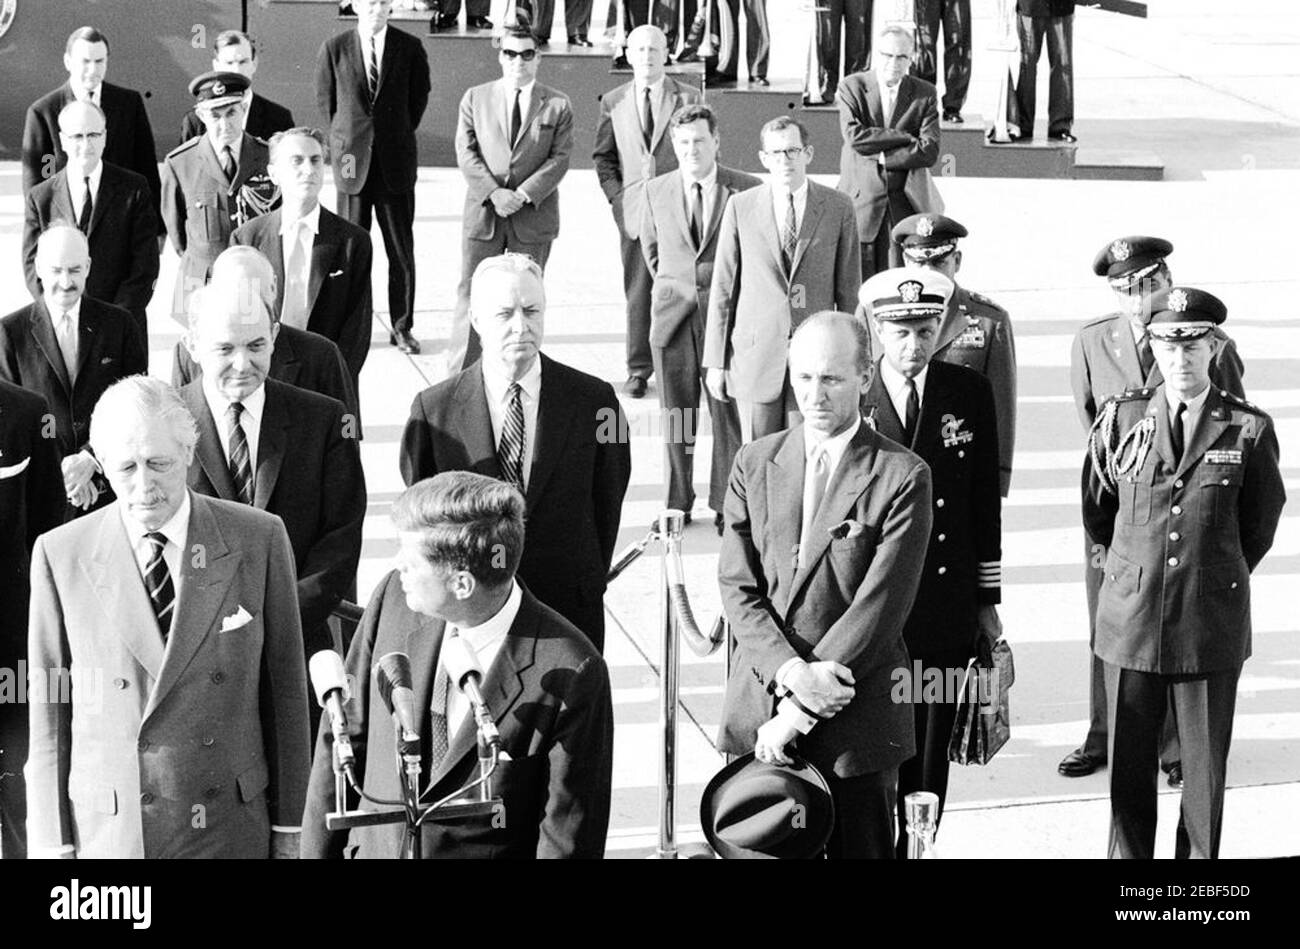 Arrival ceremonies for Harold Macmillan, Prime Minister of Great Britain, 4:50PM. President John F. Kennedy delivers welcoming remarks during arrival ceremonies in honor of Prime Minister of Great Britain, Harold Macmillan. Standing on the reviewing platform (L-R): Prime Minister Macmillan; Secretary of State, Dean Rusk; President Kennedy (at microphones, with head turned); United States Ambassador to Great Britain, David K. E. Bruce; and Chief of Protocol, Angier Biddle Duke. Also pictured: Deputy Assistant Secretary of State for European Affairs, William R. Tyler; Director of the Office of B Stock Photo